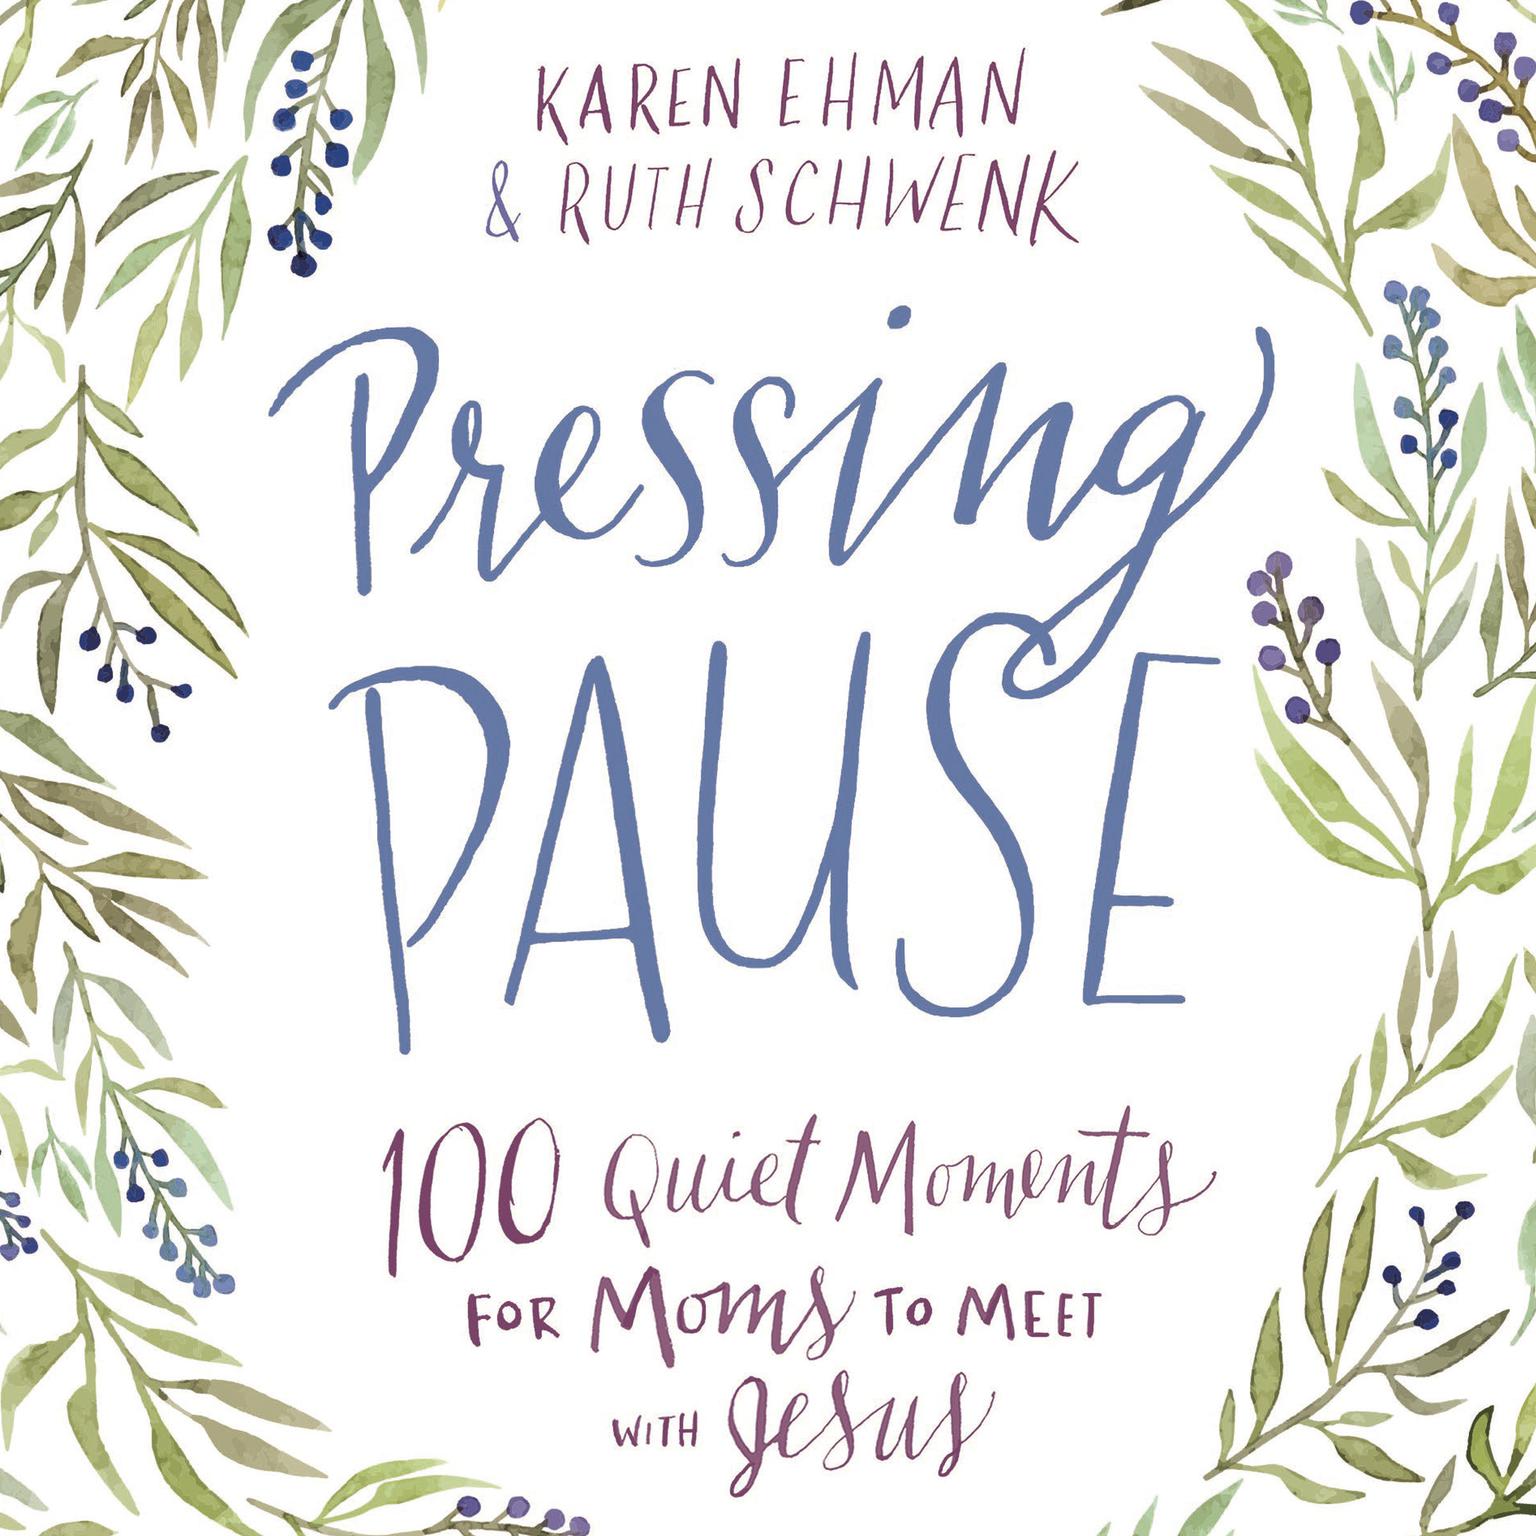 Pressing Pause: 100 Quiet Moments for Moms to Meet with Jesus Audiobook, by Karen Ehman